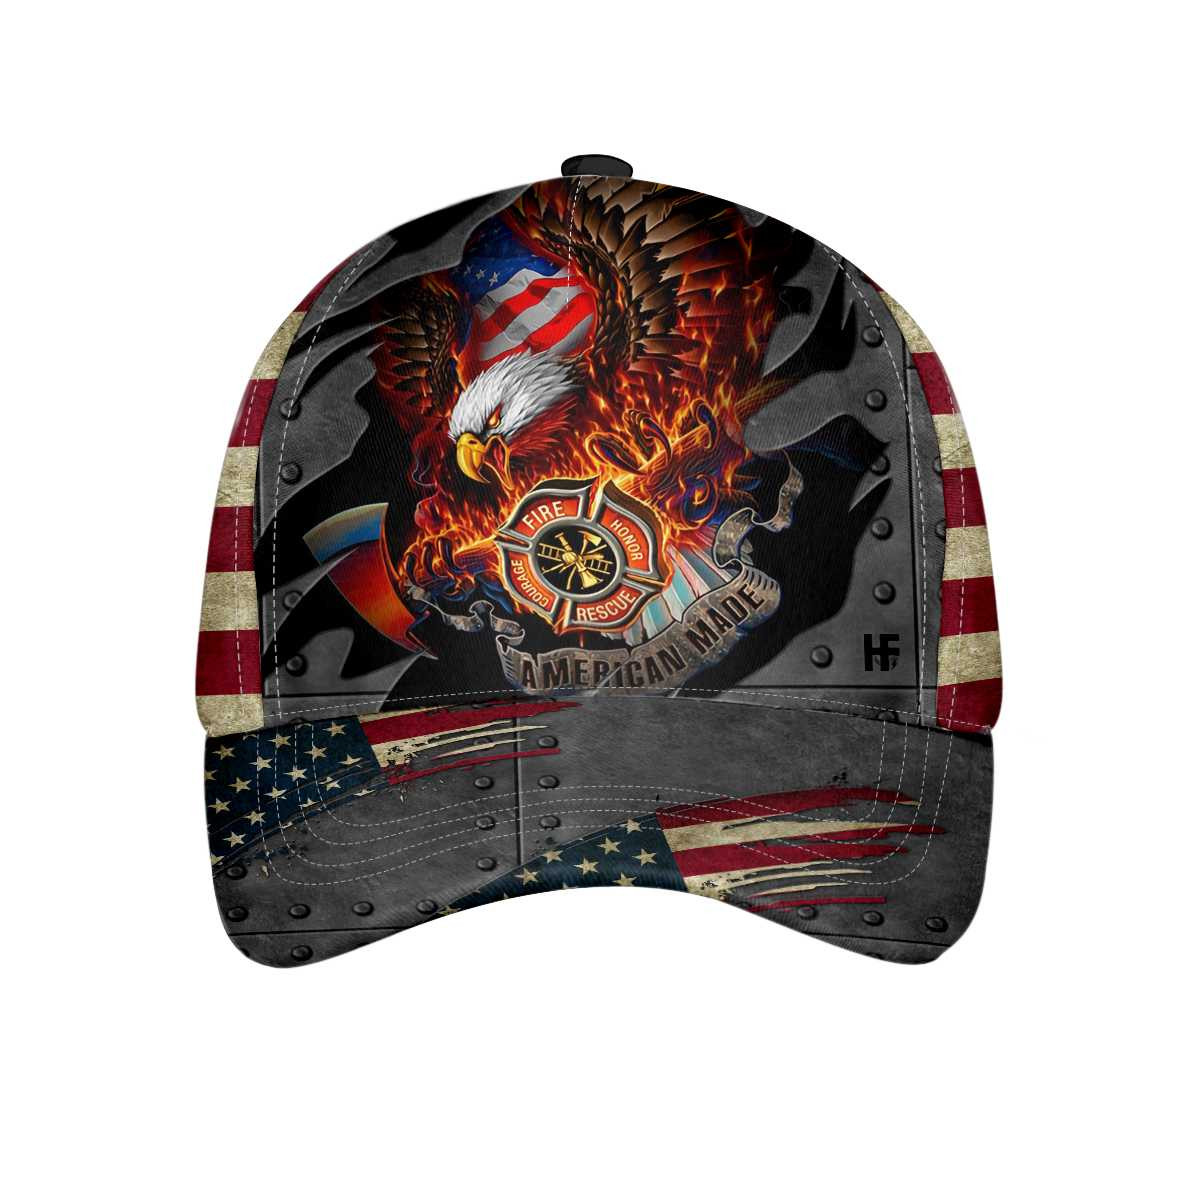 American Made Fire Fighter Classic Cap Cool Firefighter Baseball Cap Gift For Firefighters